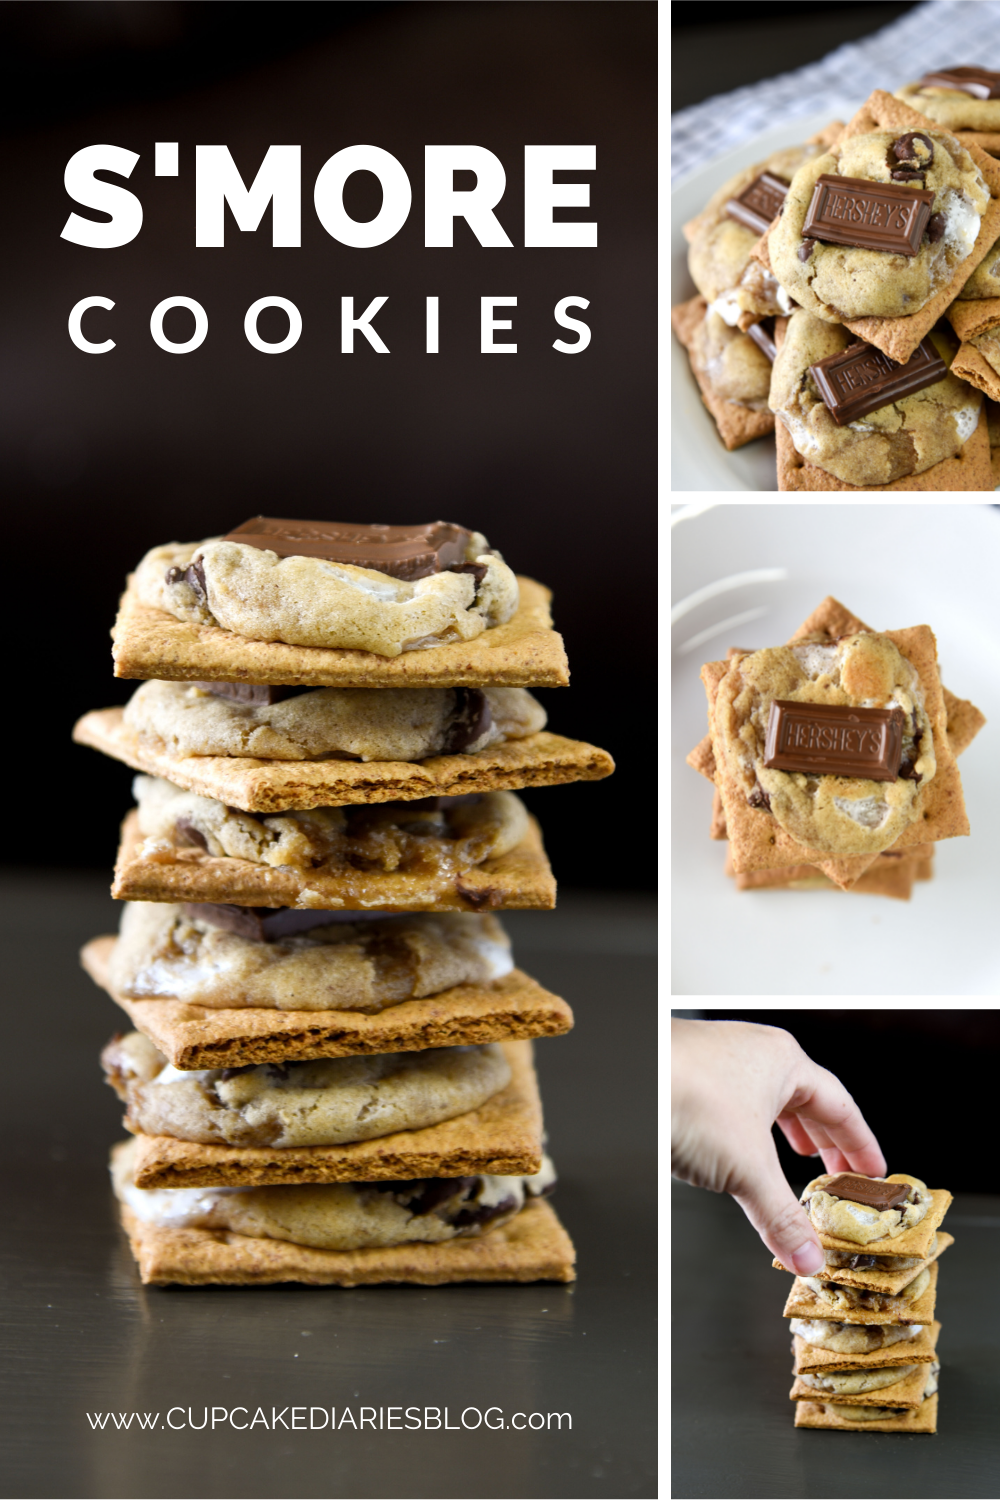 S'more Cookies - You're going to love the flavors and textures in these cookies! S'mores never tasted so good.